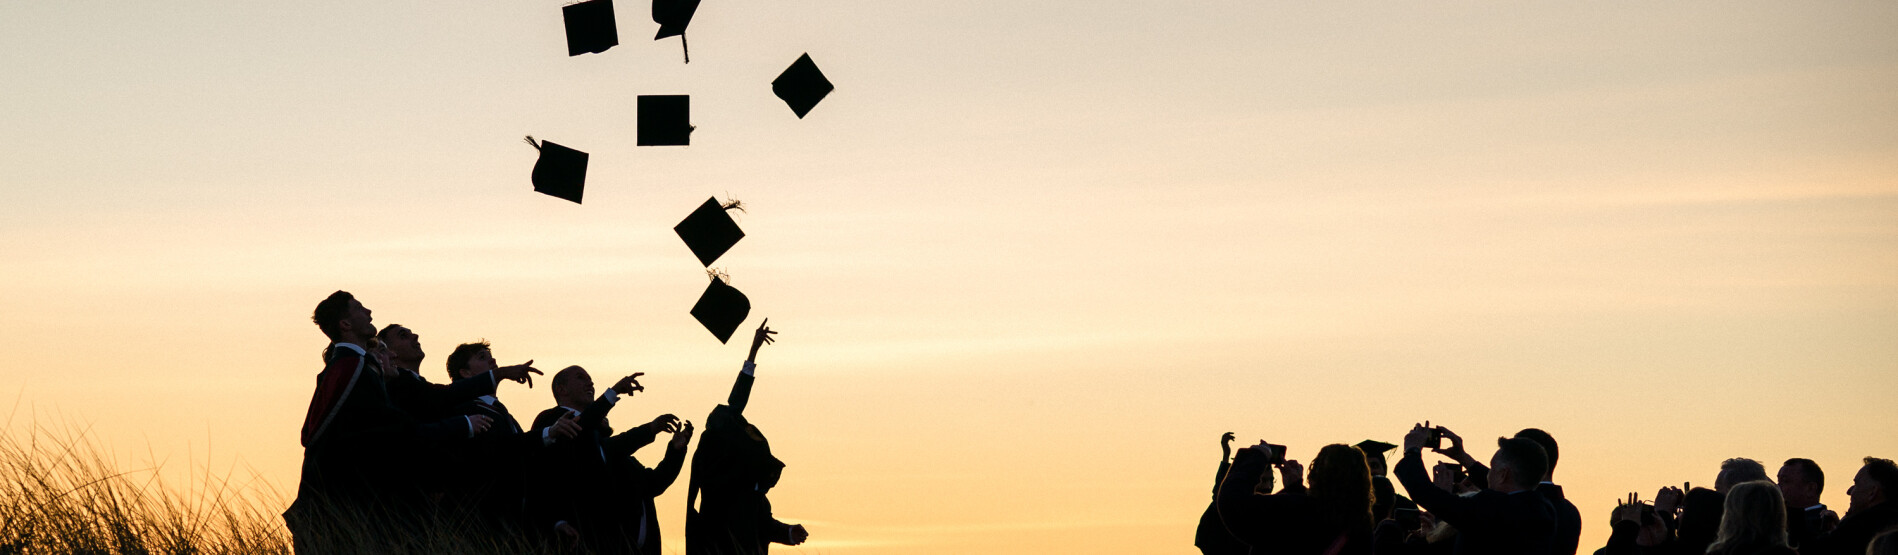 Image of students graduating, throwing hats up in the air on the beach.